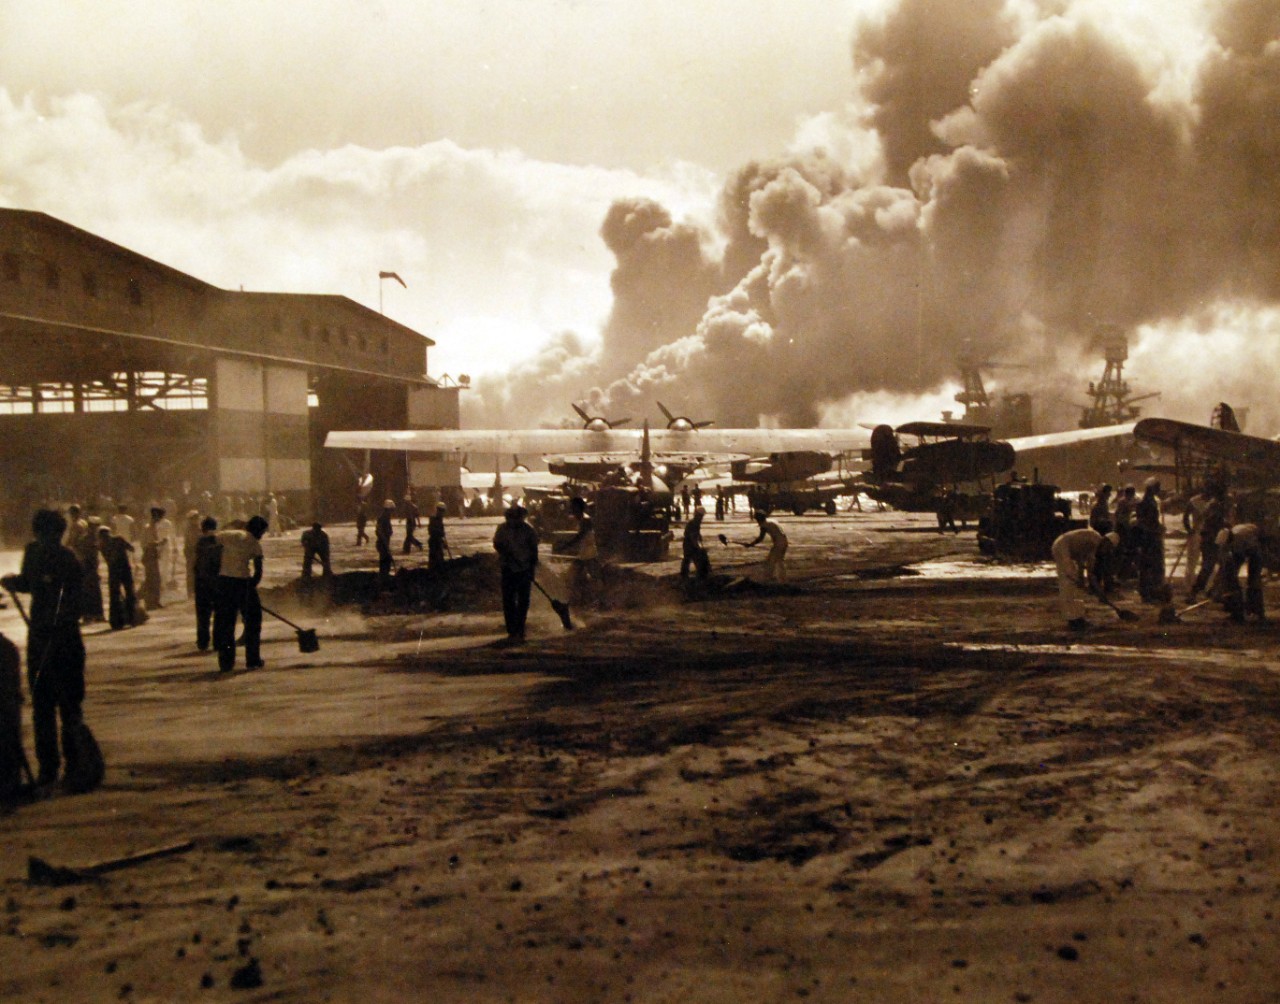 <p>80-G-32439: Japanese Attack on Pearl Harbor, December 7, 1941. Sailors stand amid wrecked planes at Ford Island seaplane base, watching ship exploding in the center background.&nbsp;</p>
